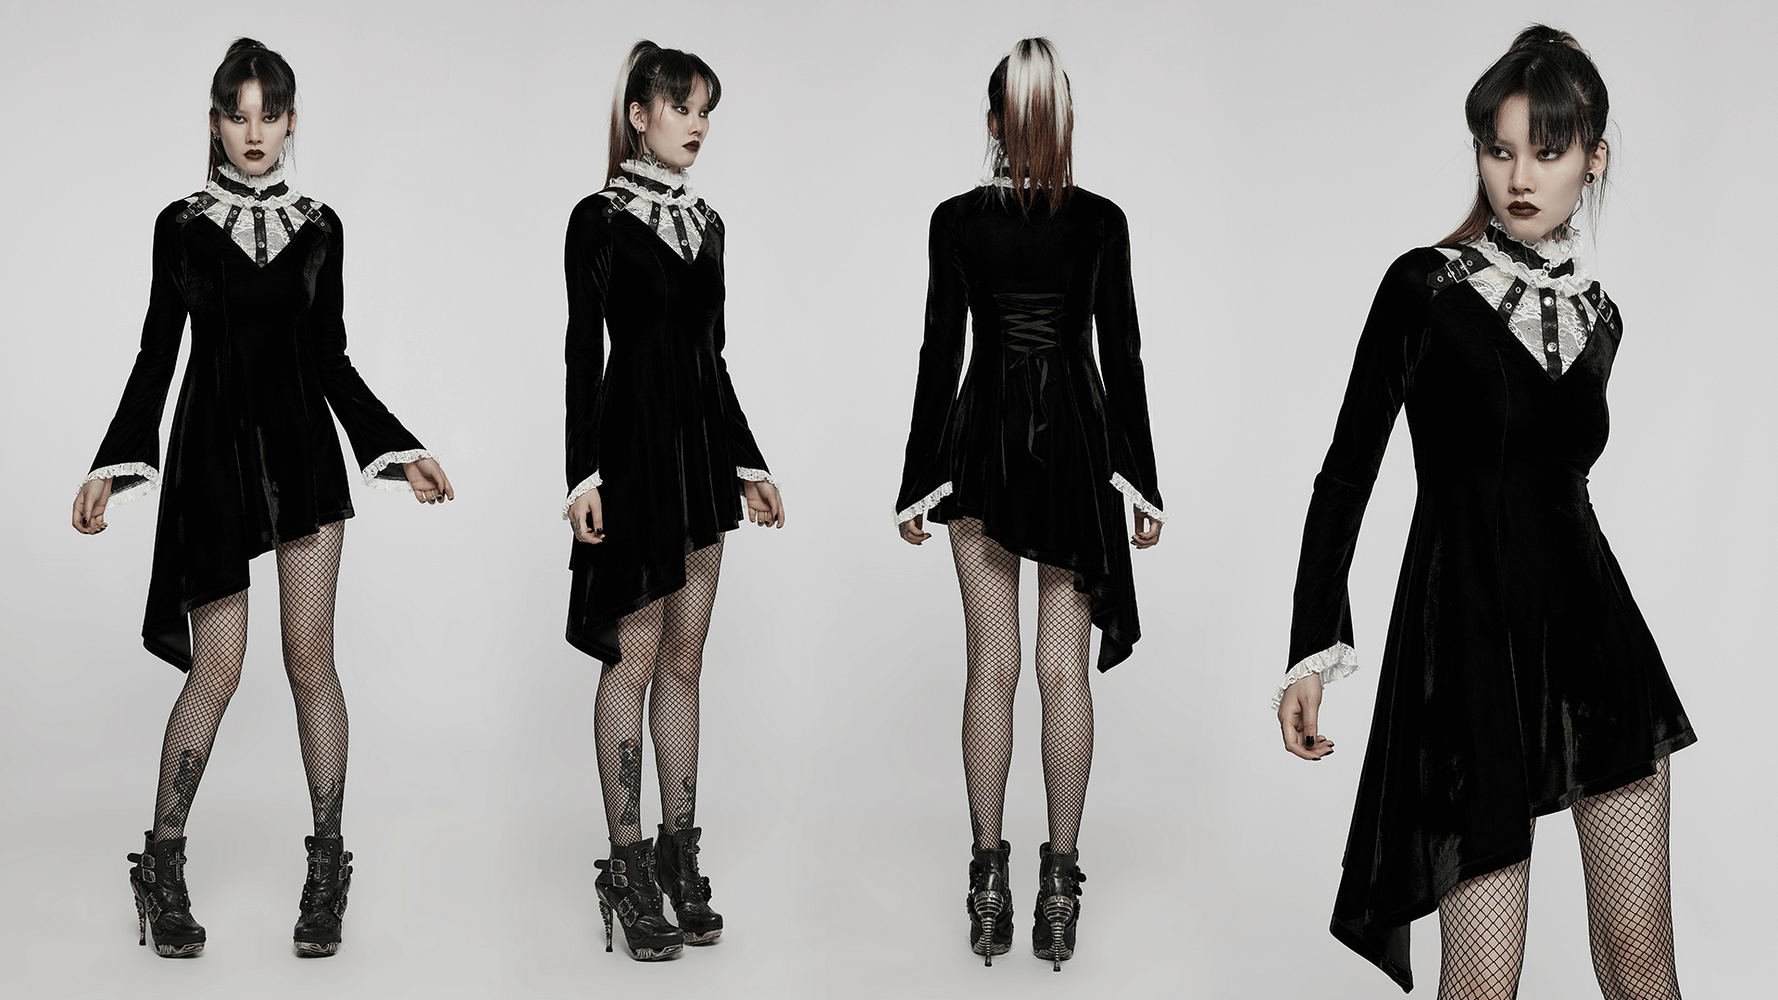 Victorian Inspired Gothic Dress with Lace And Metal Details - HARD'N'HEAVY